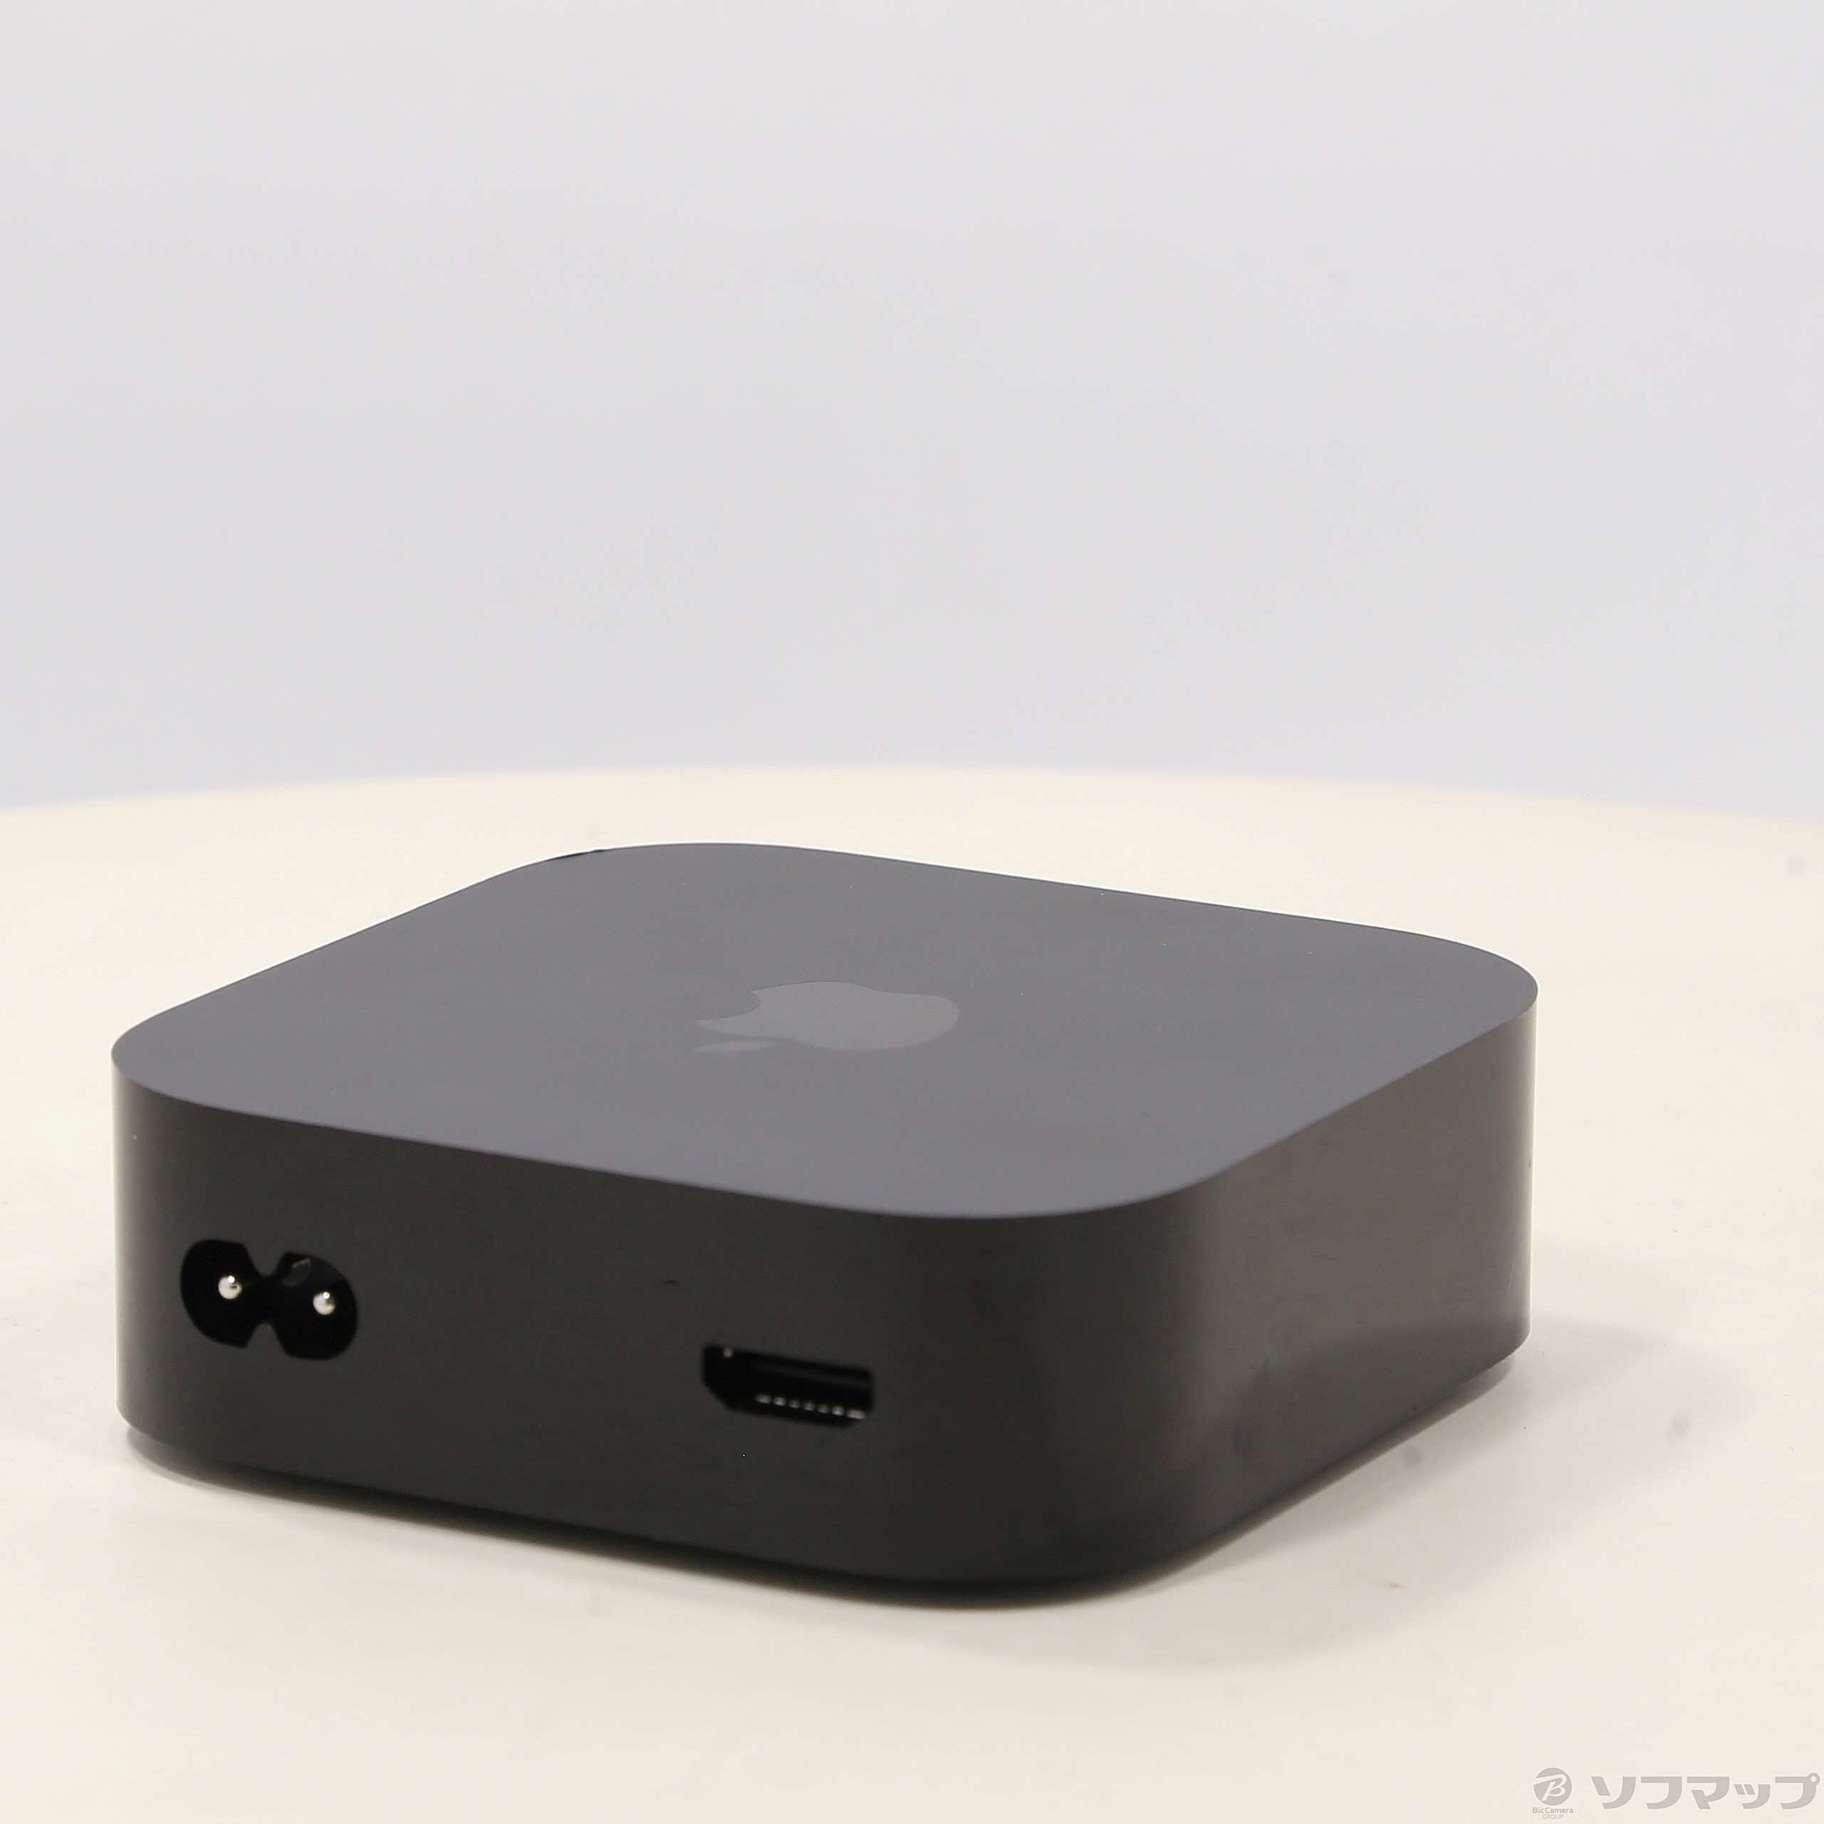 【中古】Apple TV 4K 第3世代 64GB Wi-Fiモデル MN873J／A [2133048917851] - リコレ